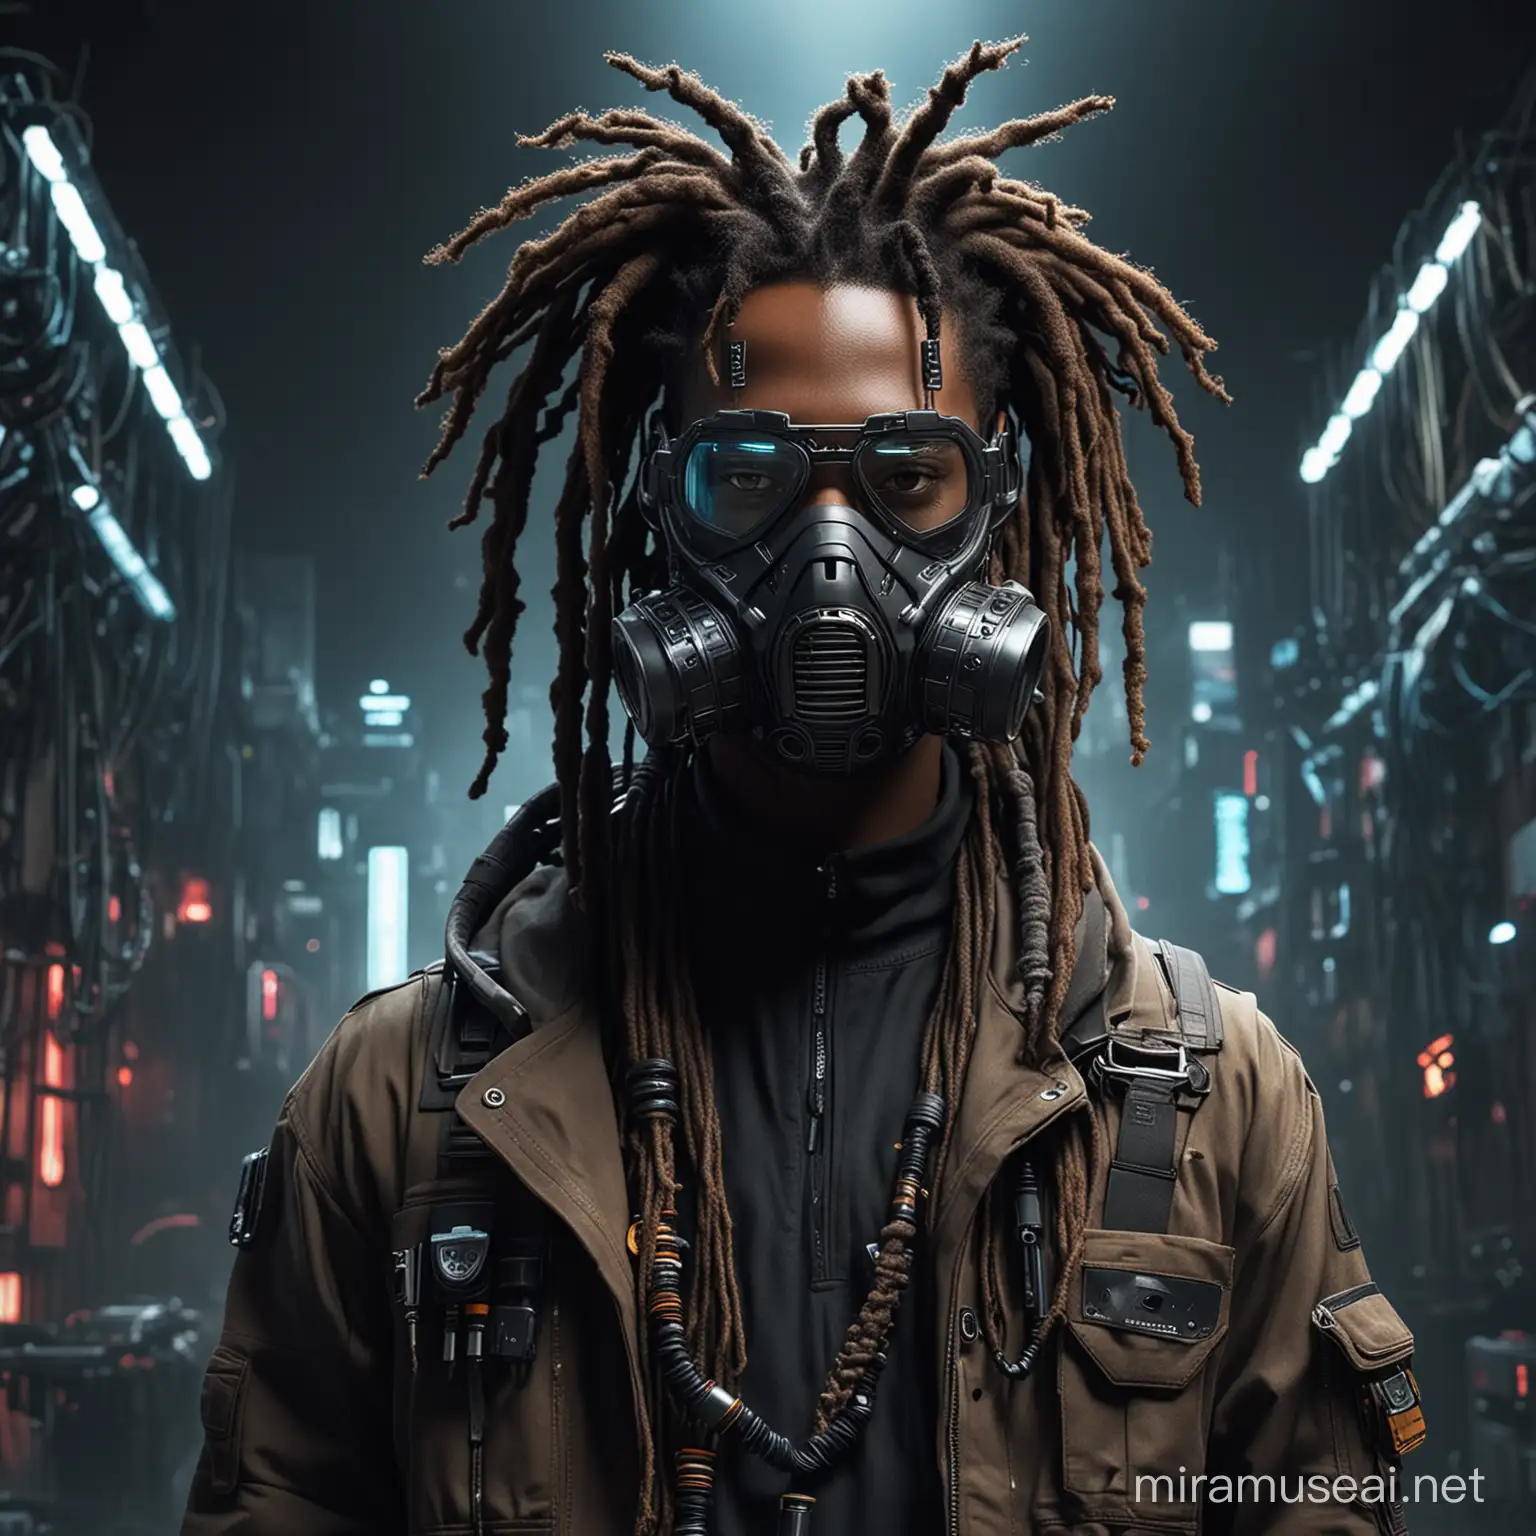 Imagine a movie poster based on the portrayal of A black Craftsman with dreadlocks creating trap music and transitioning to becoming a master Craftsman with musical abilities and his purpose in life. The craftsman is wearing futuristic clothes, he has on an advanced cyberpunk respiratory mask covering his mouth and advanced eye protection covering his eyes. Full body photo